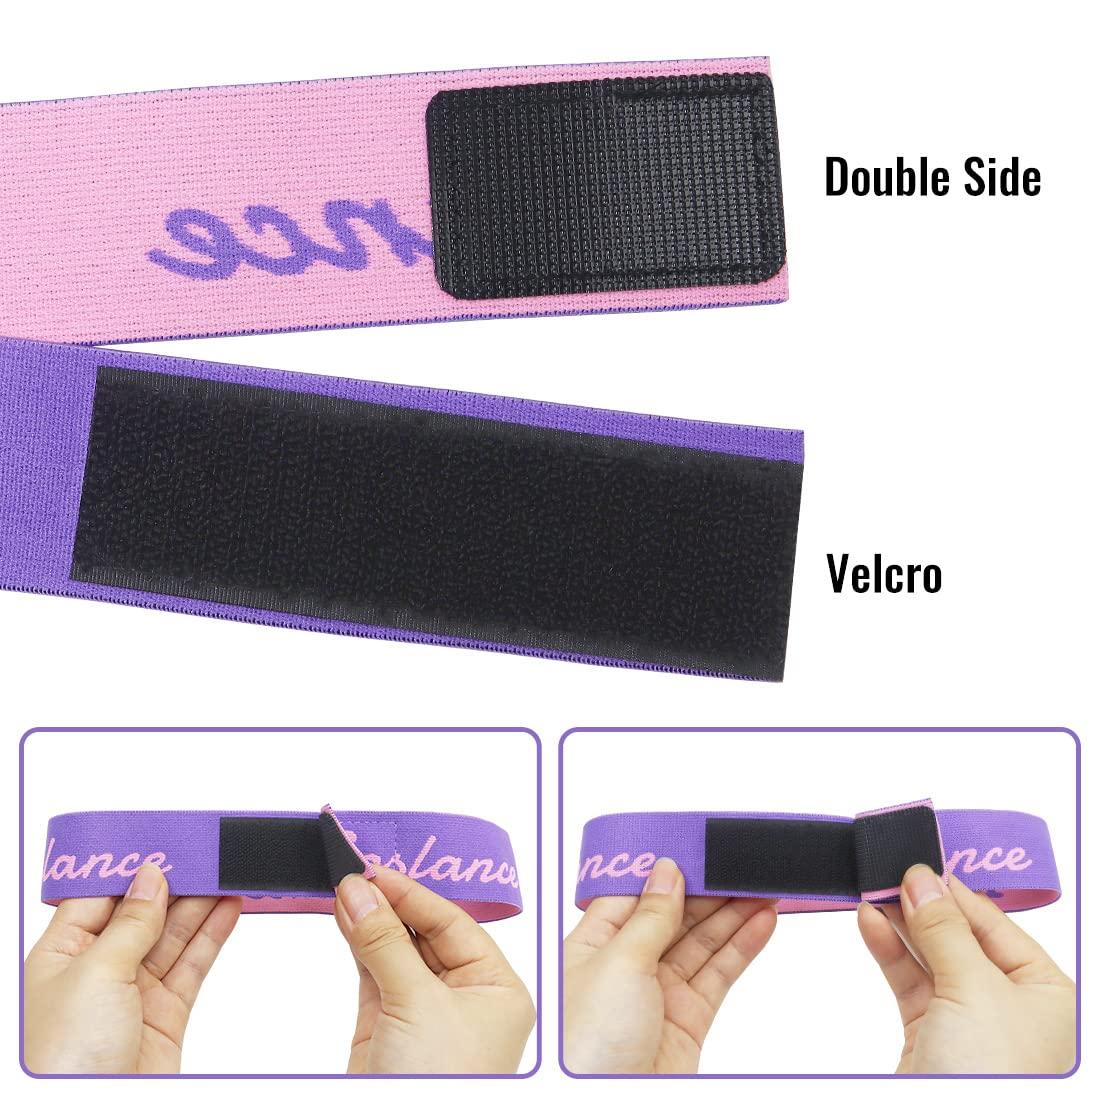 Custom Wholesale Melt Elastic Bands With Your Own LOGO 